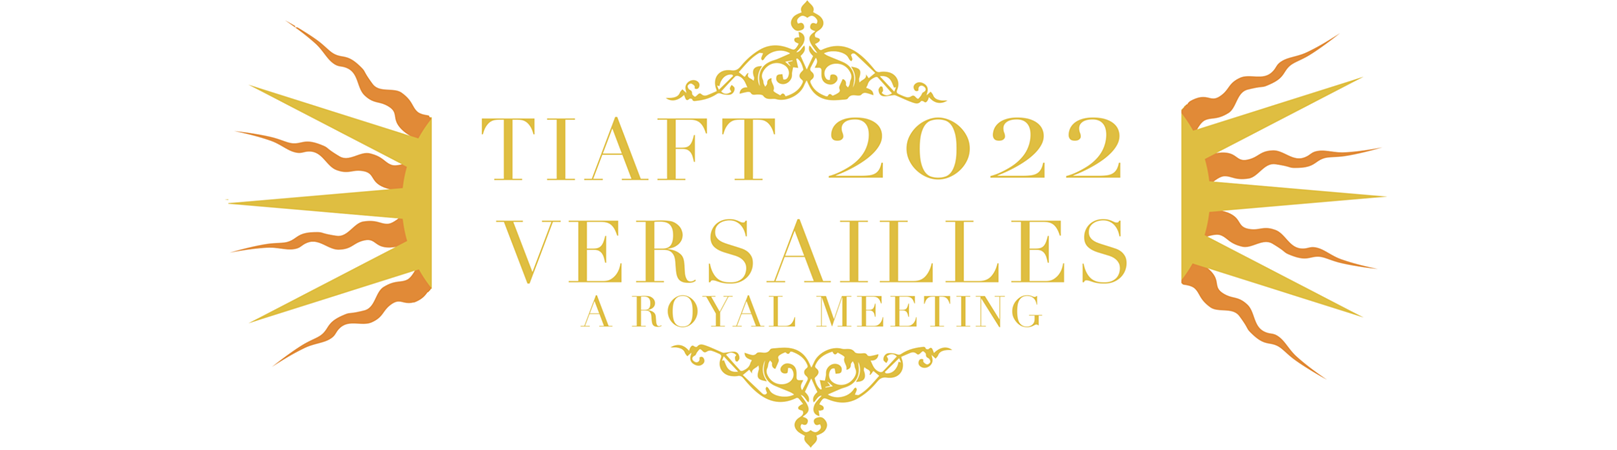 Meet Lipomed at the TIAFT 2022 in Versailles-France